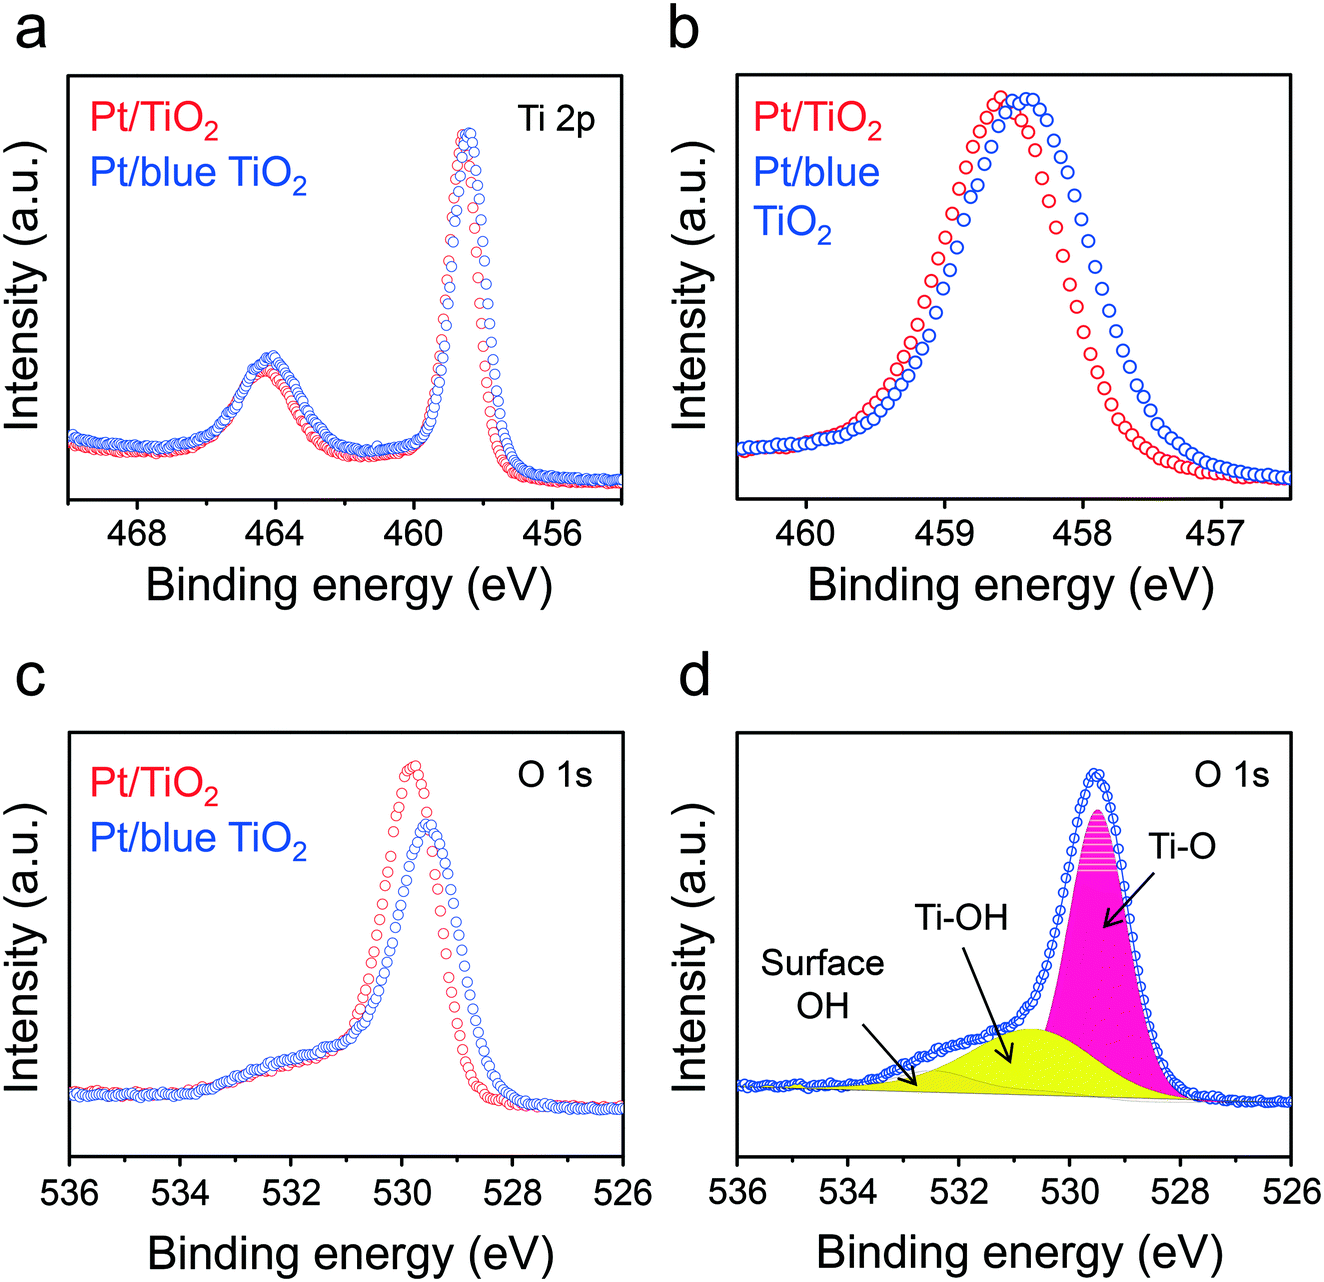 Influence Of Lattice Oxygen On The Catalytic Activity Of Blue Titania Supported Pt Catalyst For Co Oxidation Catalysis Science Technology Rsc Publishing Doi 10 1039 D0cyk